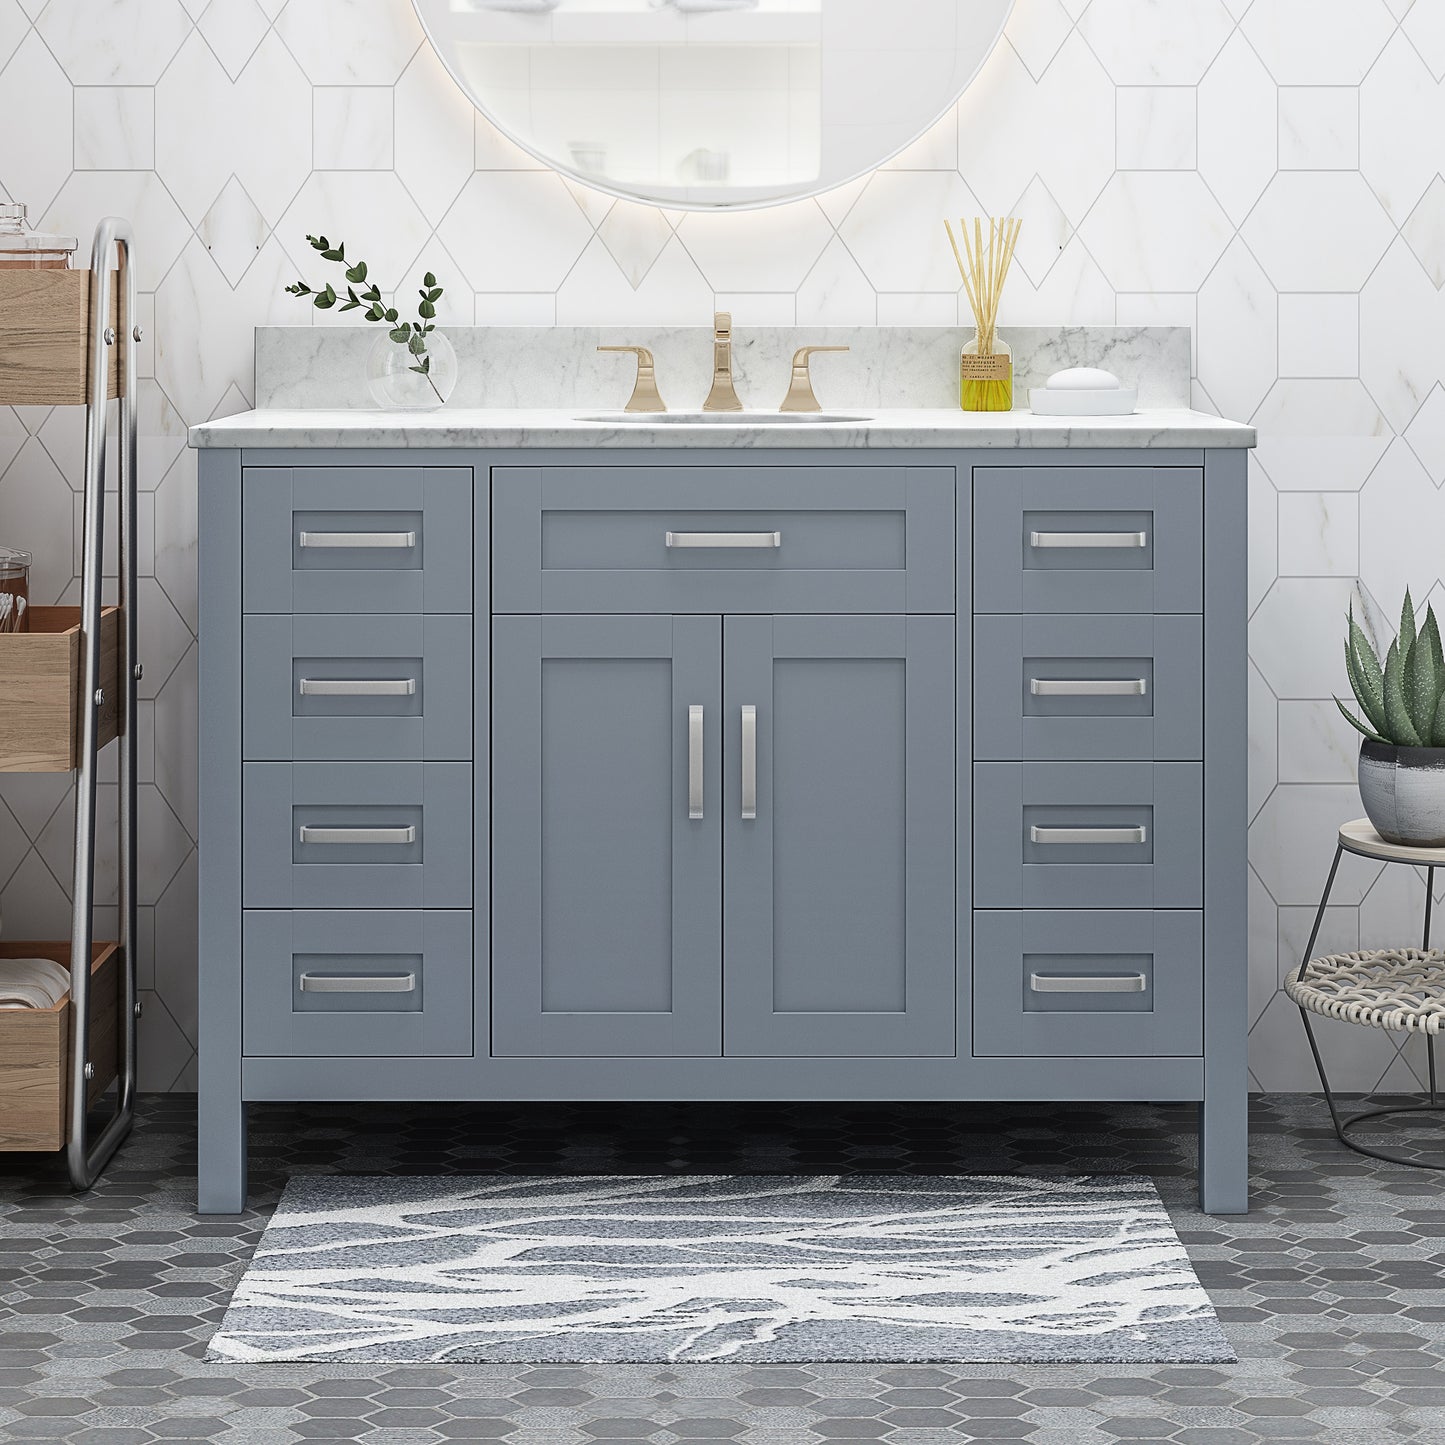 Greeley Contemporary 48" Wood Bathroom Vanity (Counter Top Not Included)